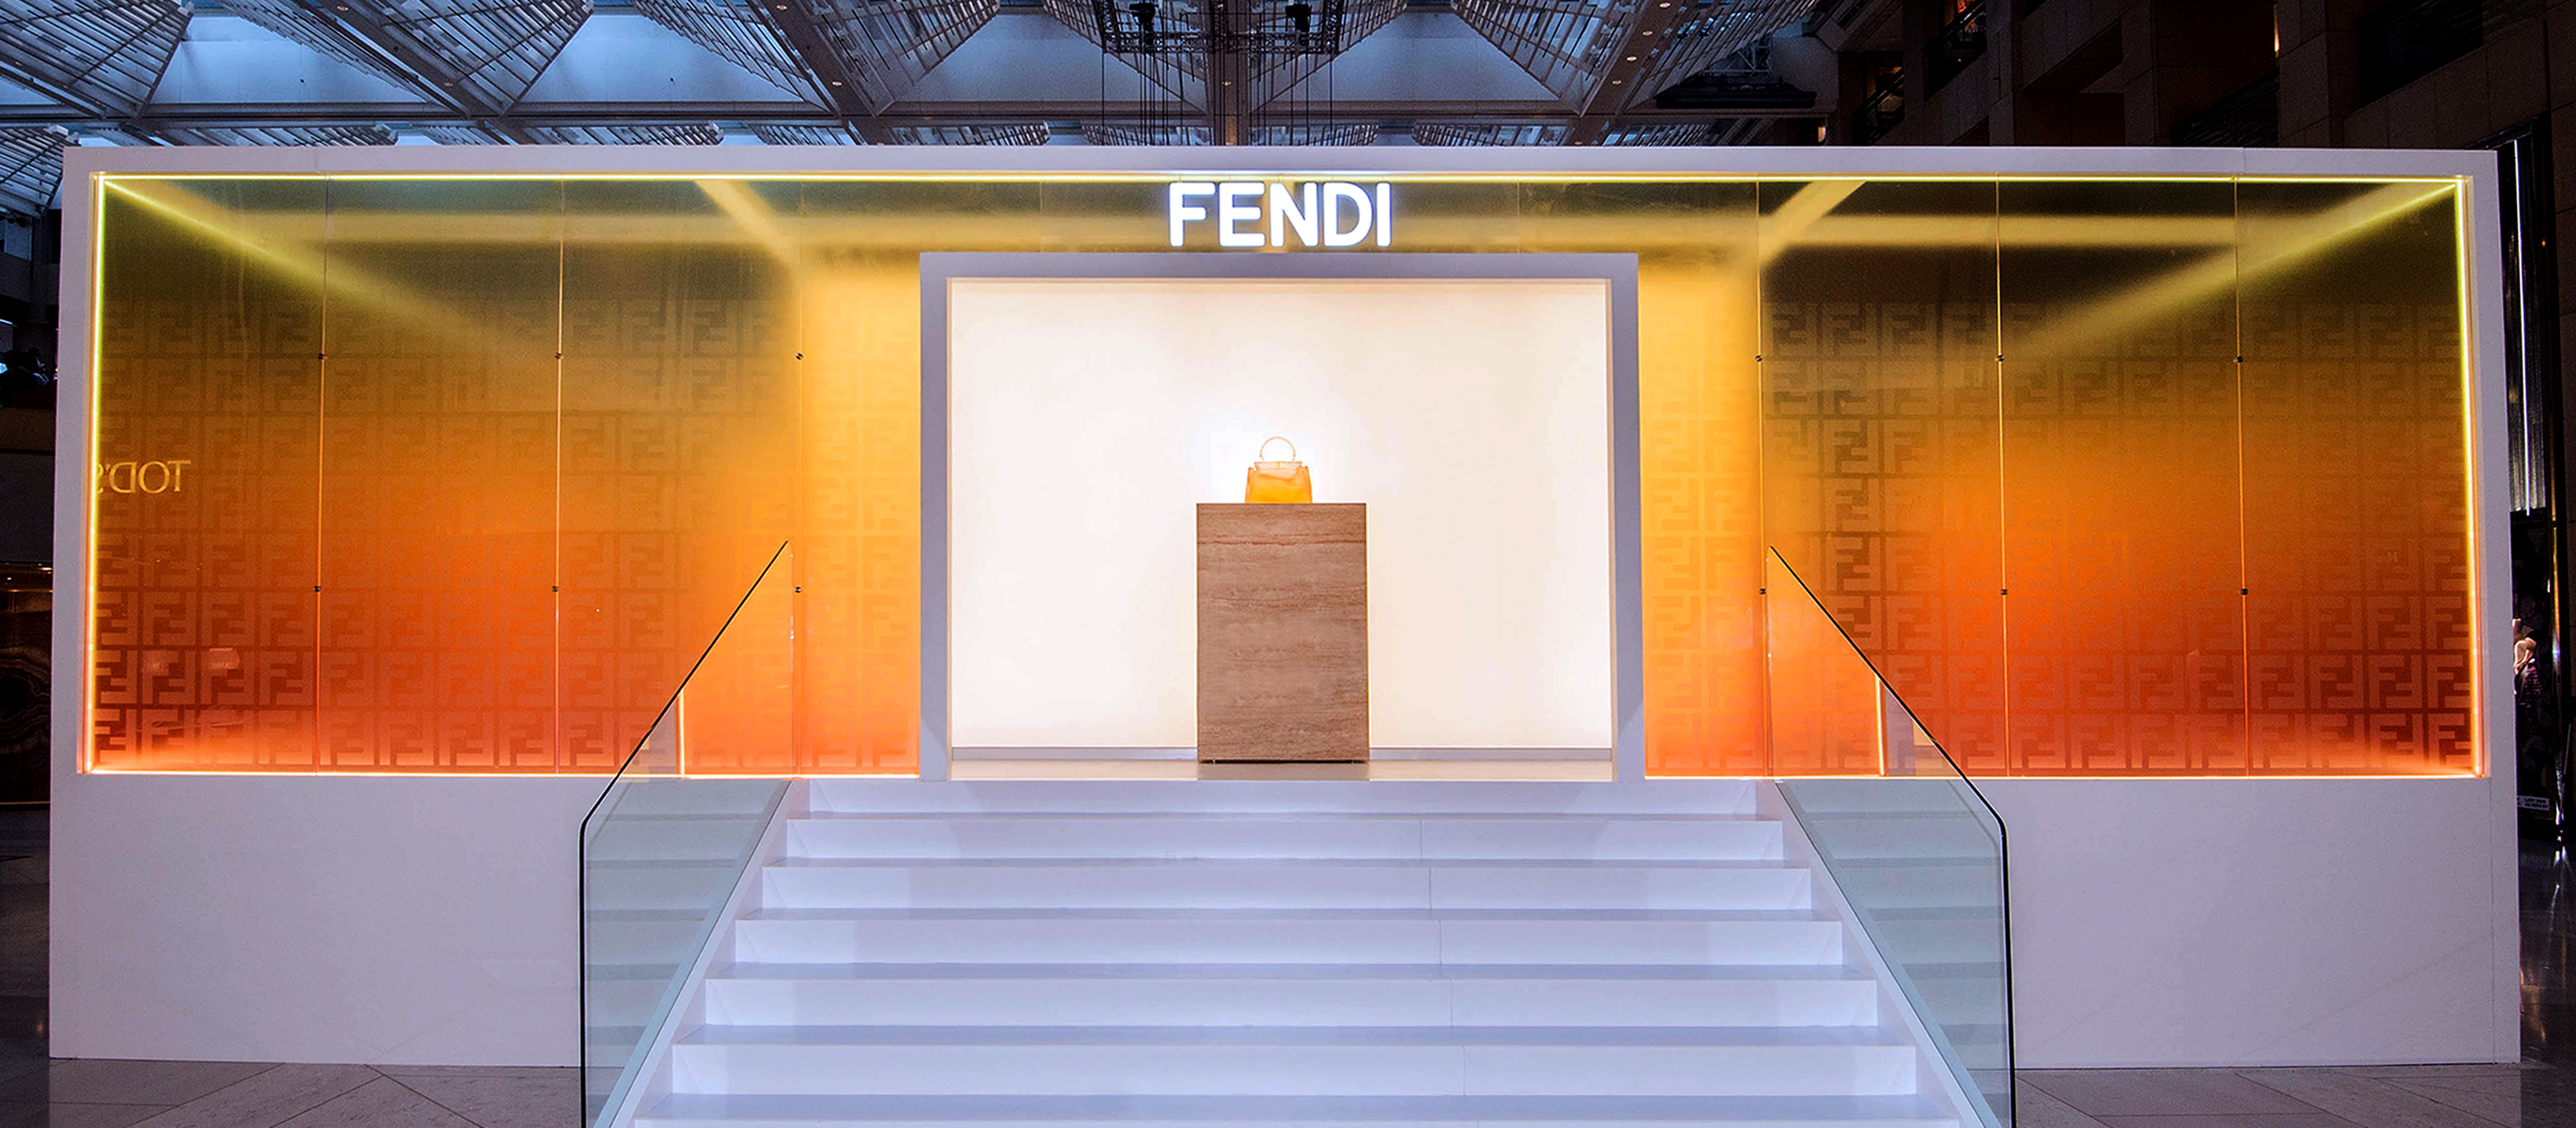 Fendi “The Shape of Water” Exhibition